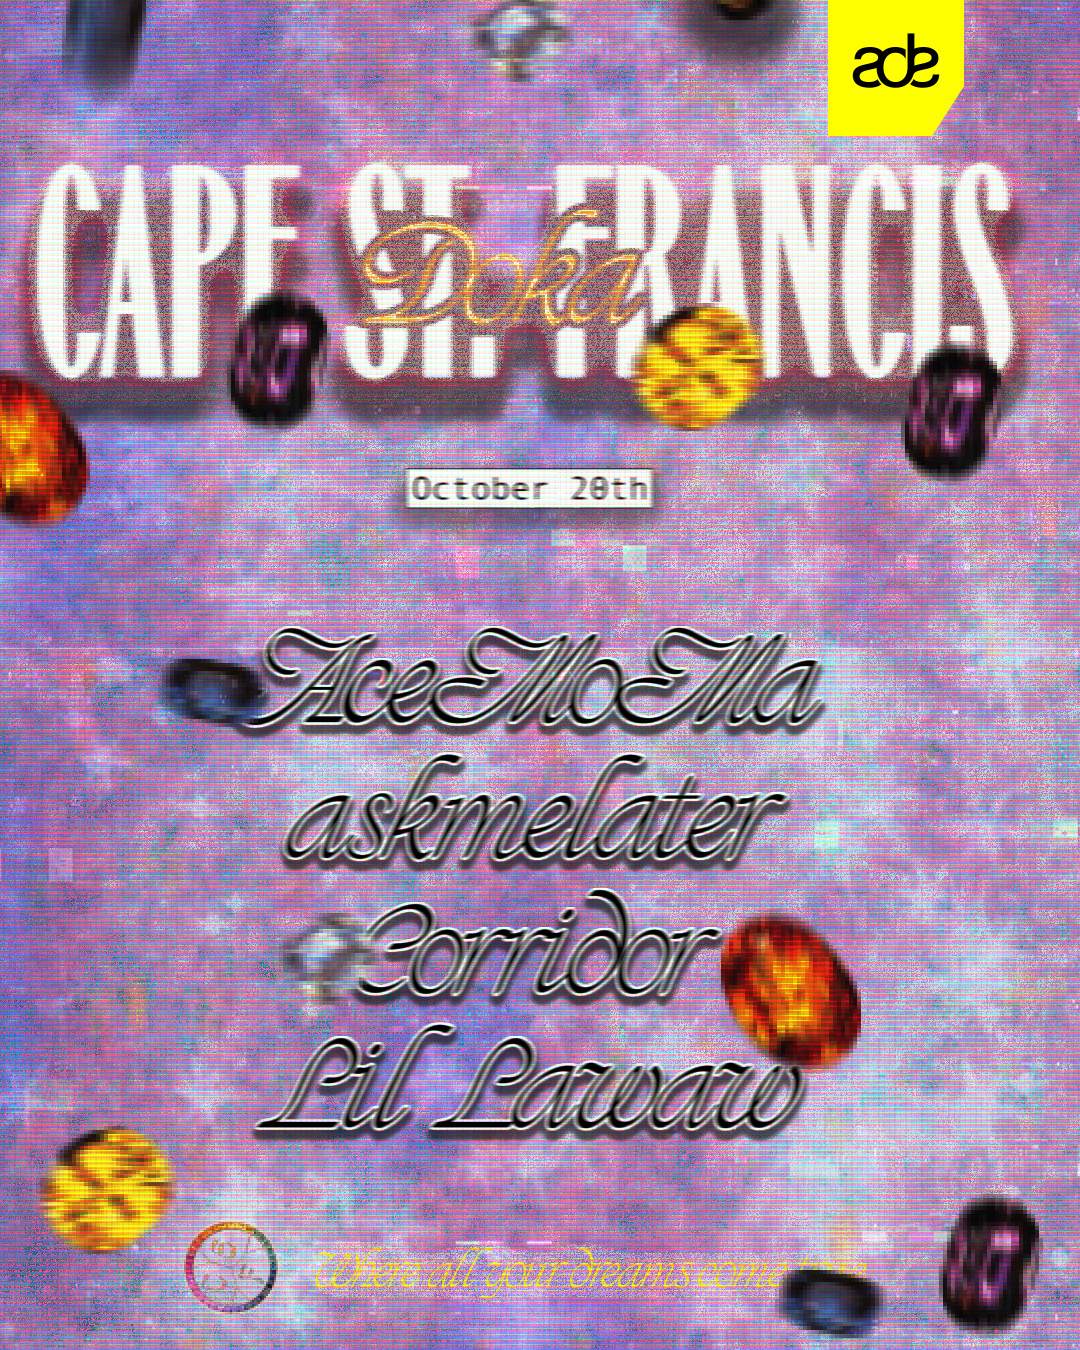 Cape St. Francis ADE with AceMoMA (US), askmelater, DJ Corridor and Lil Lawaw at Doka Studio - フライヤー表